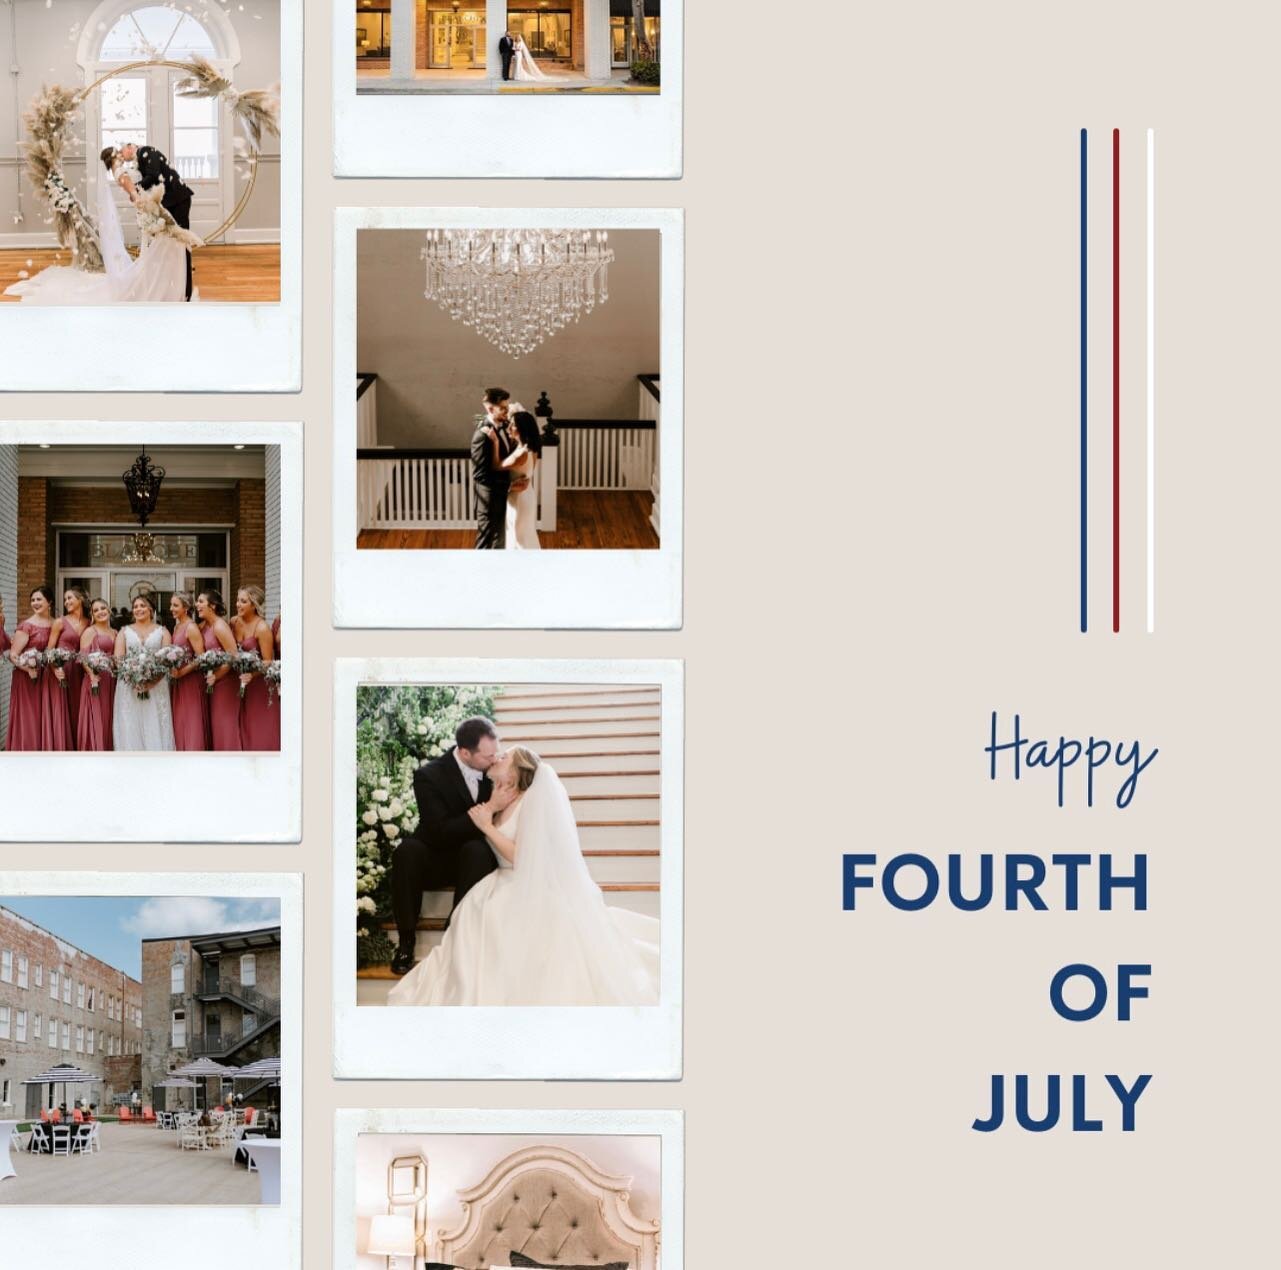 The Blanche wishes you a happy and safe Fourth of July! 🇺🇸 #fourthofjuly #independenceday